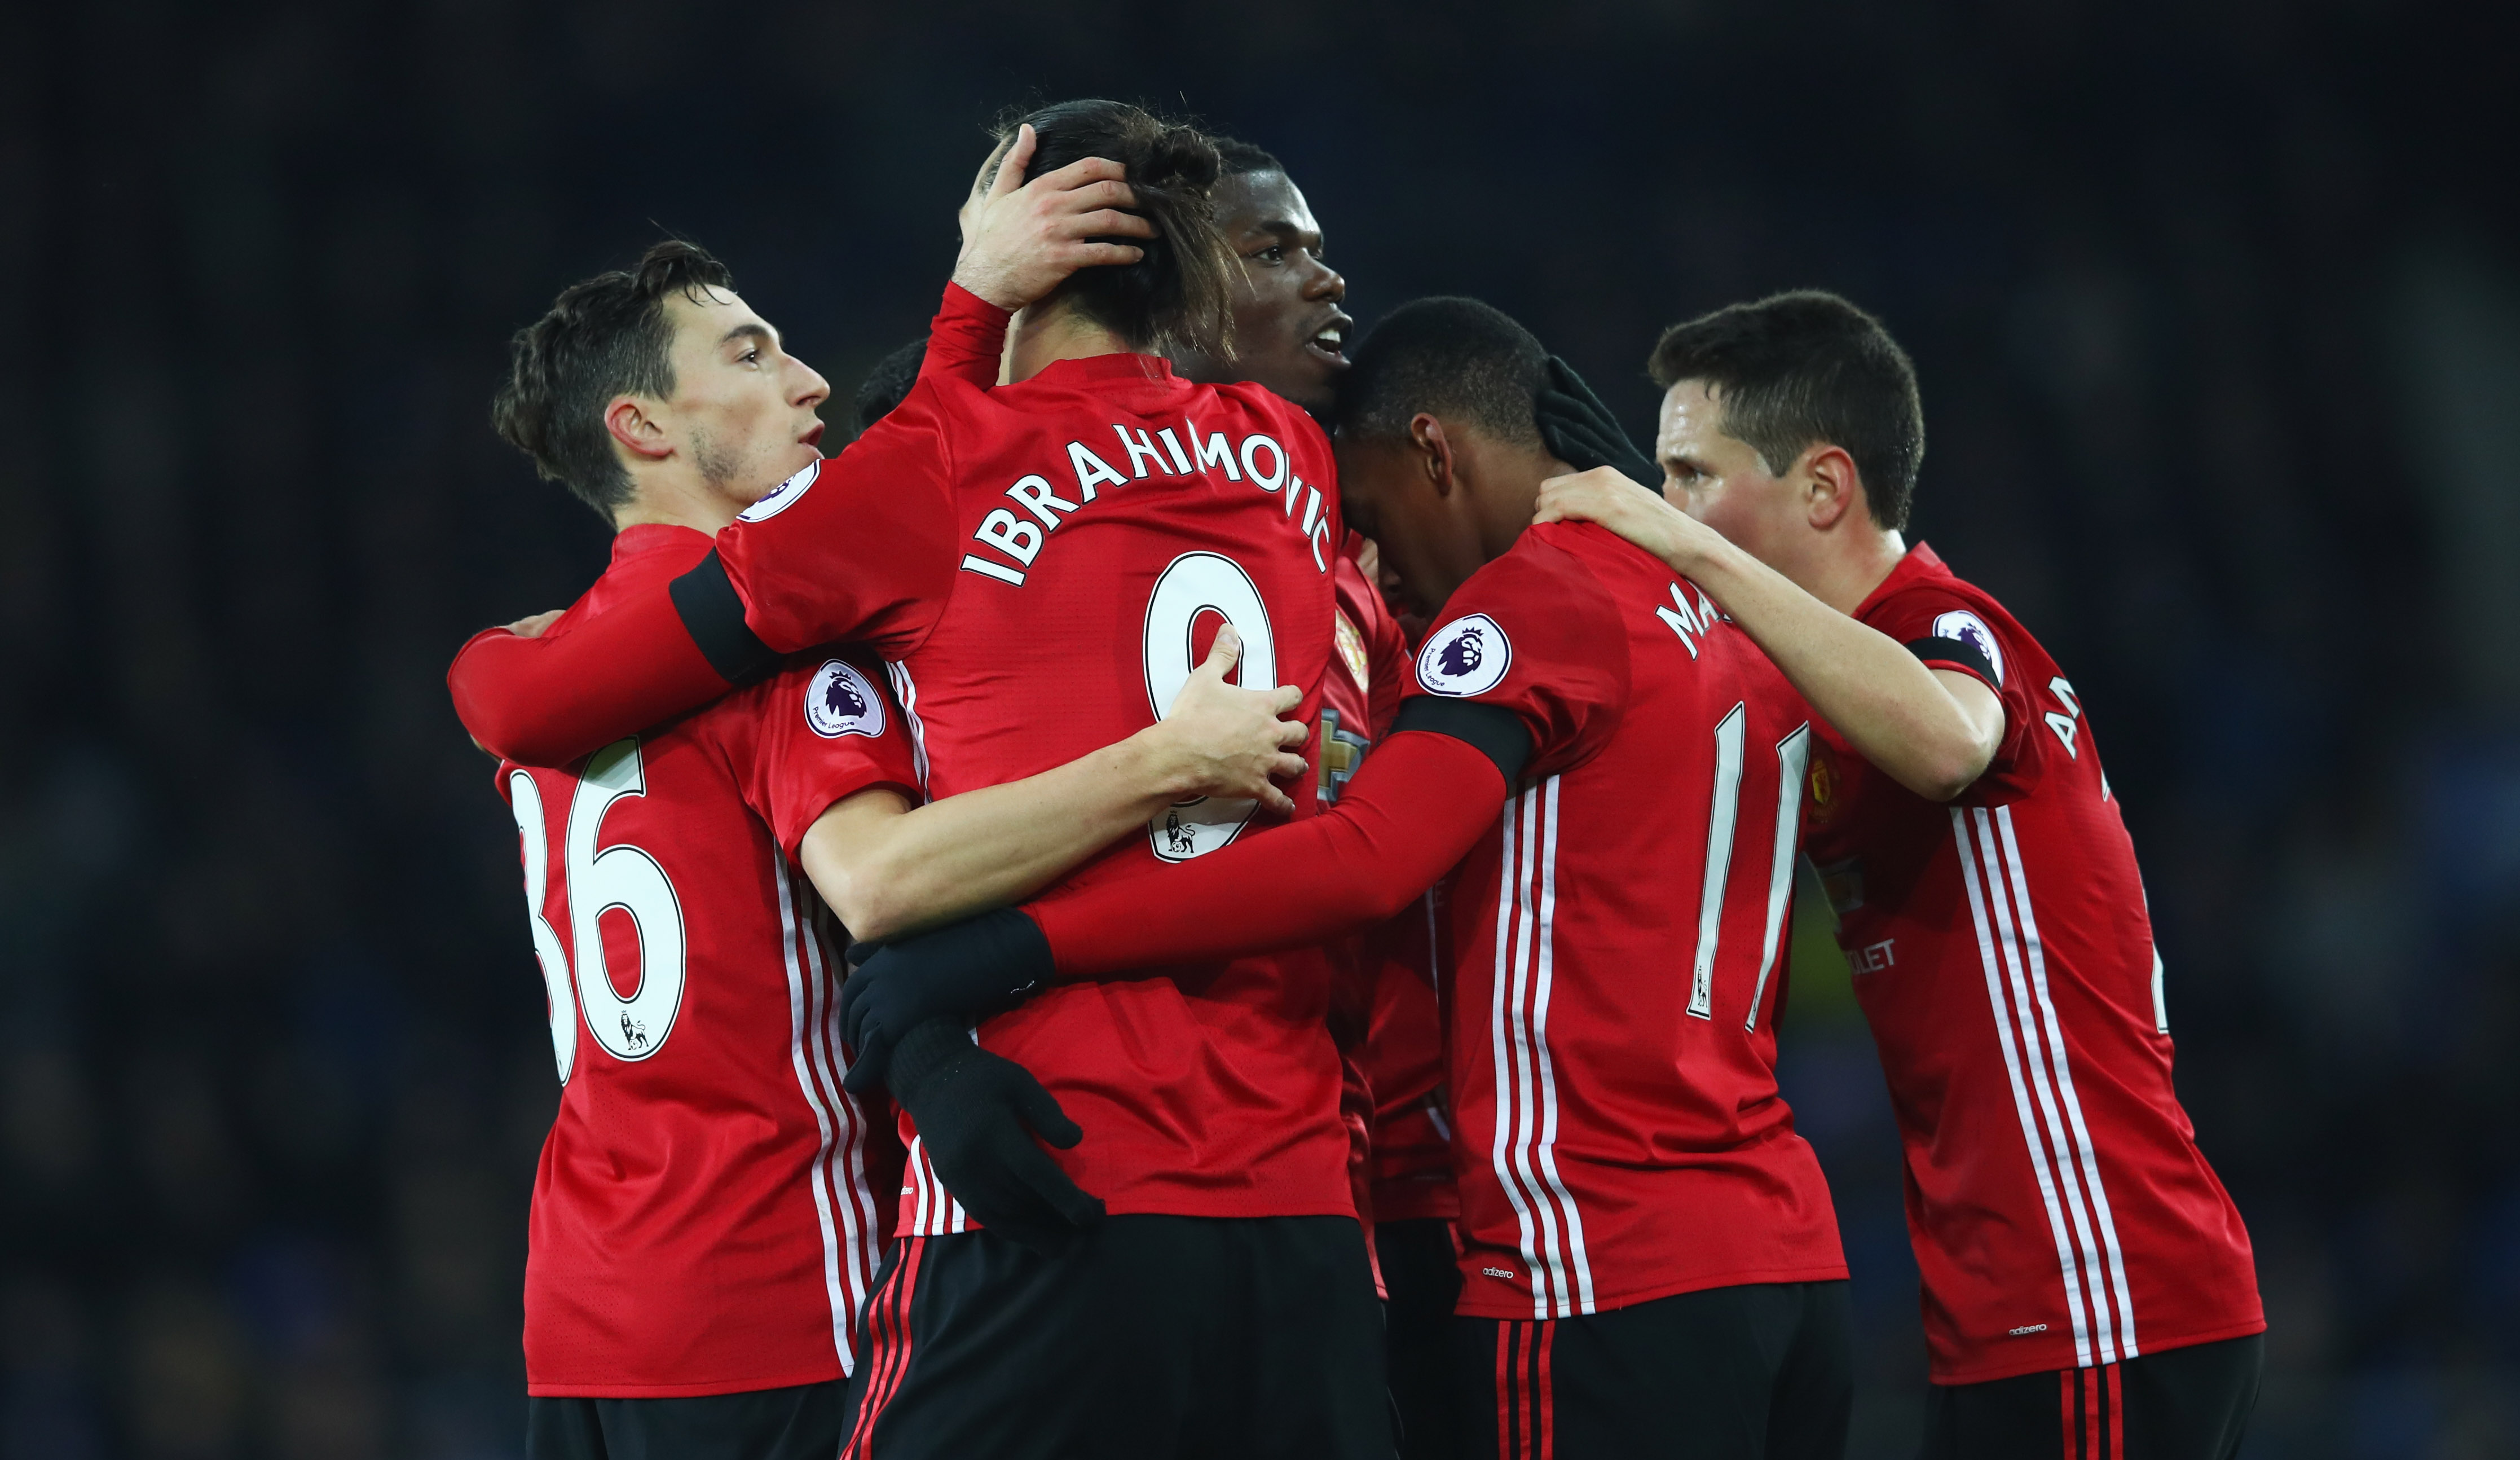 LIVERPOOL, ENGLAND - DECEMBER 04:  Zlatan Ibrahimovic of Manchester United (9) celebrates with team mates as he scores their first goal during the Premier League match between Everton and Manchester United at Goodison Park on December 4, 2016 in Liverpool, England.  (Photo by Clive Brunskill/Getty Images)